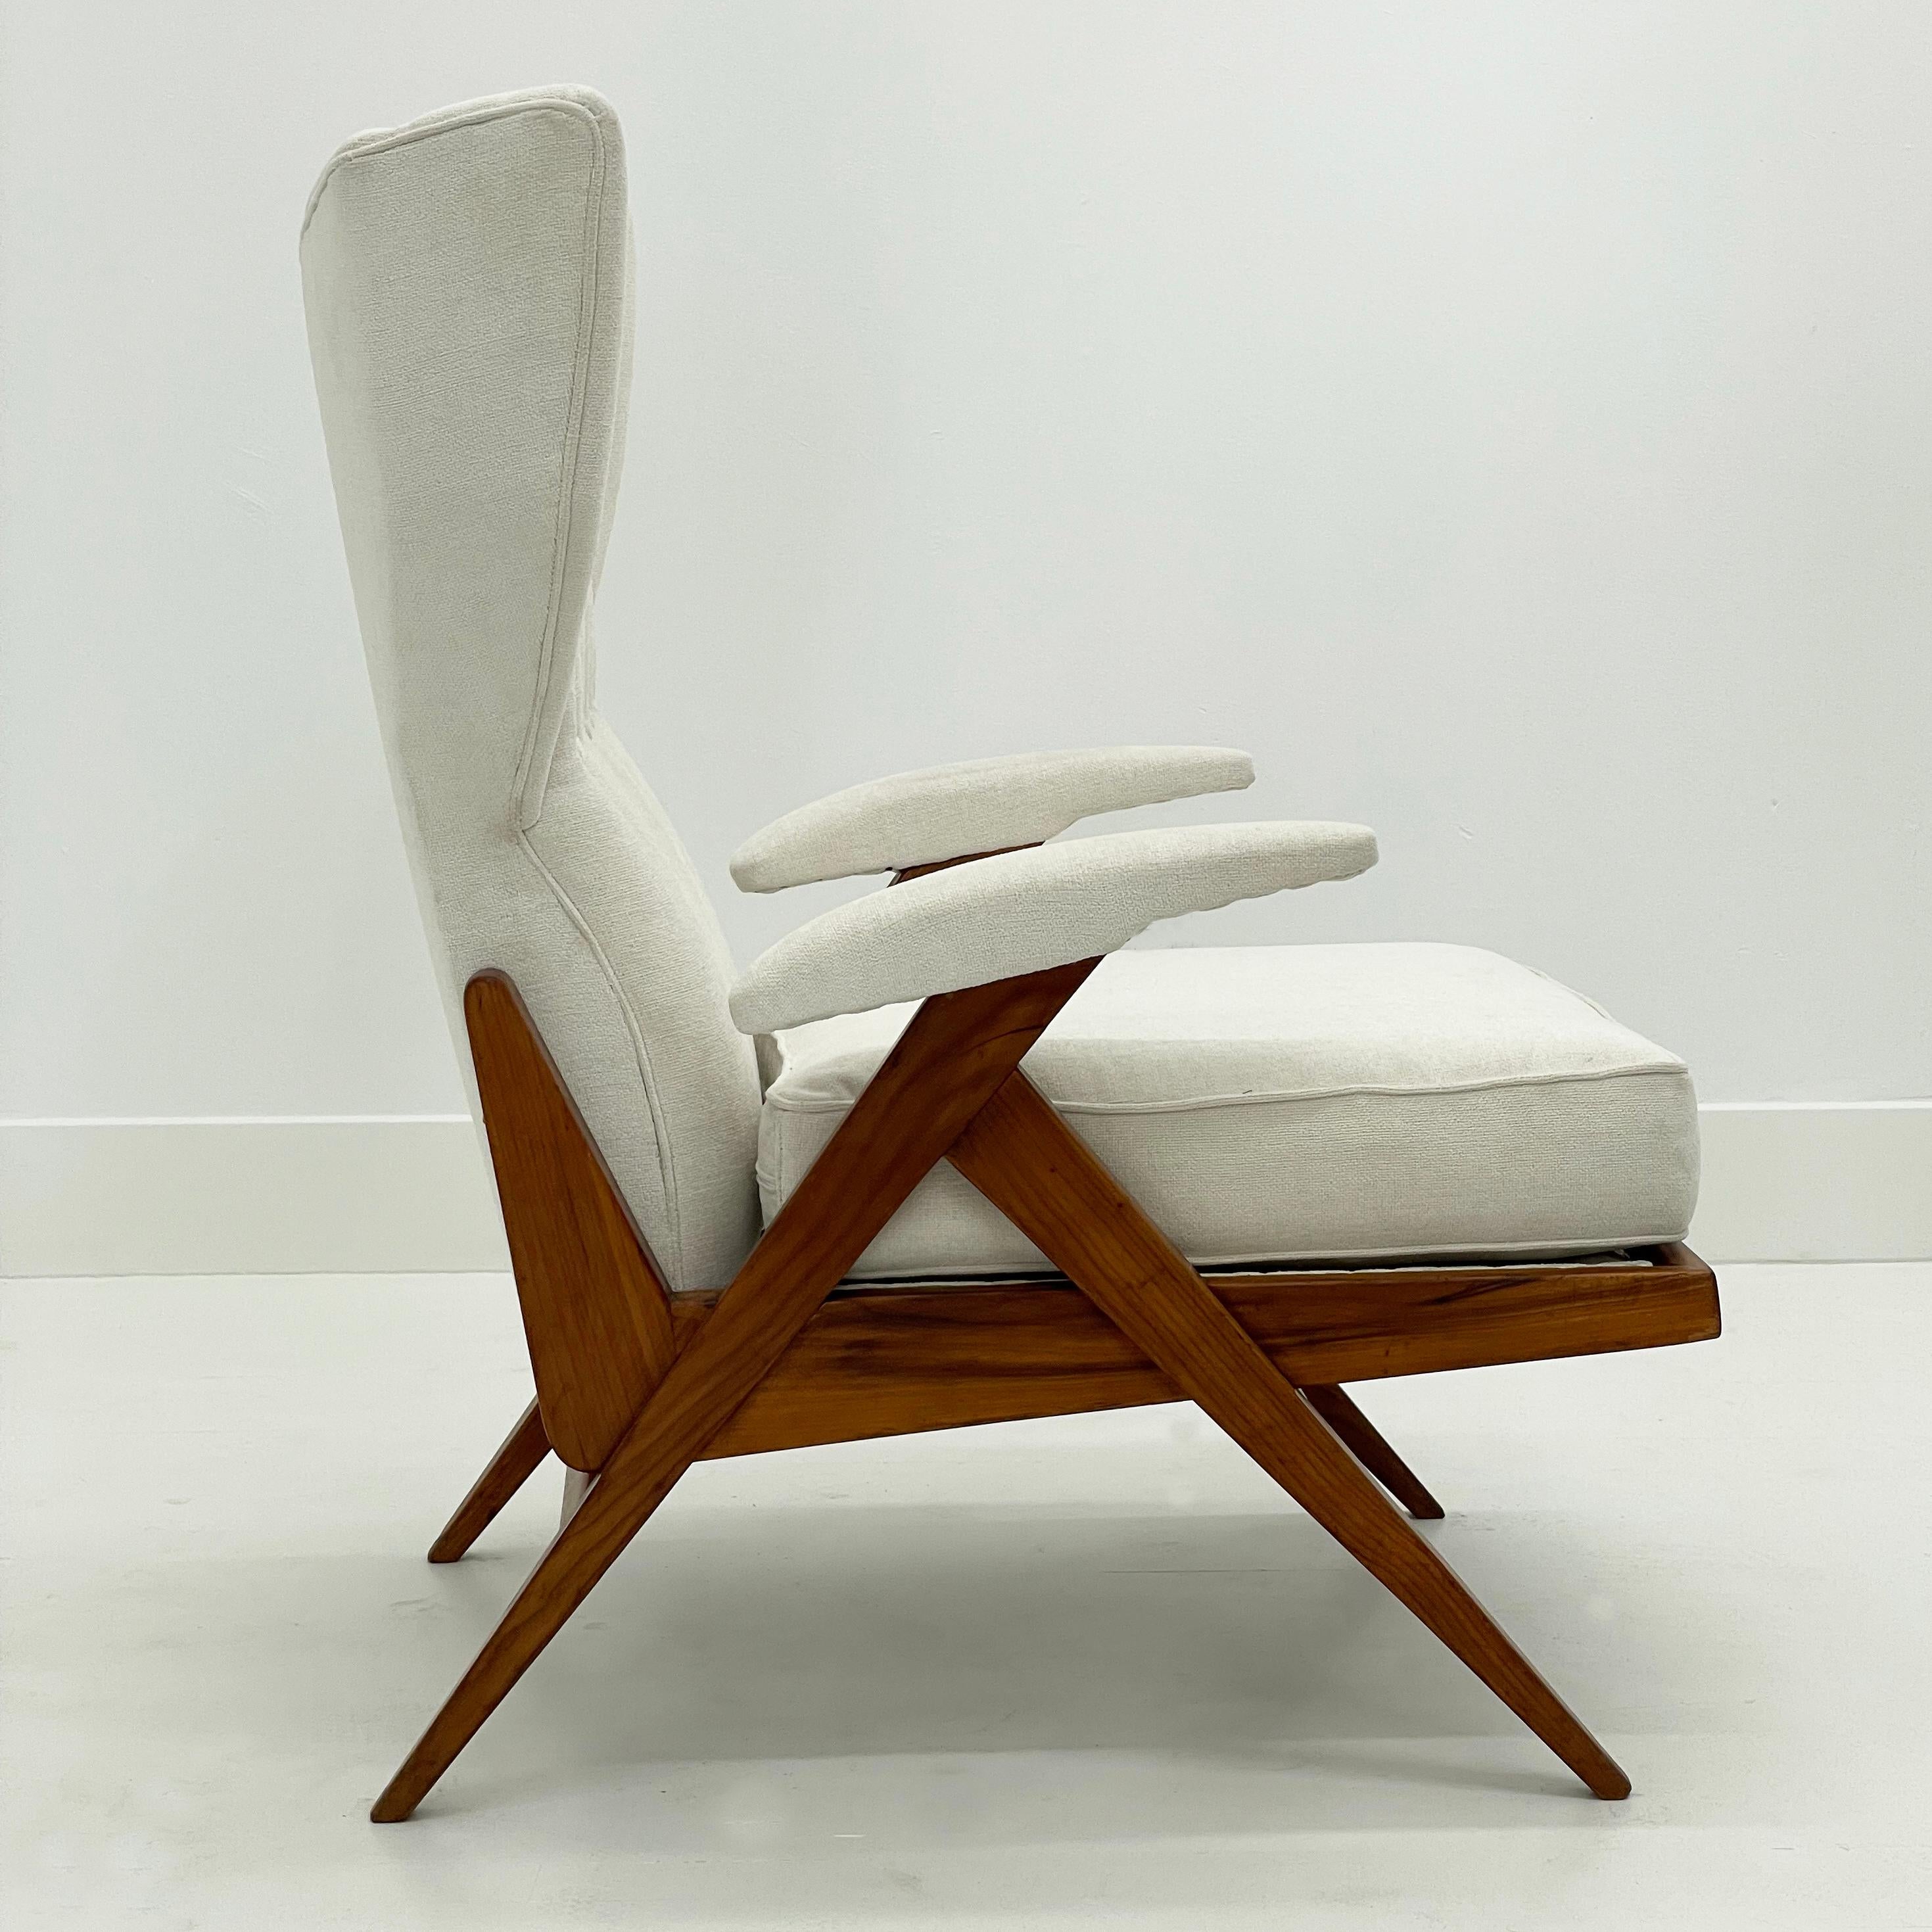 Cherry Mid-century Wingback Recliner Lounge Chairs, Renzo Franchi, 1950's, Italy  For Sale